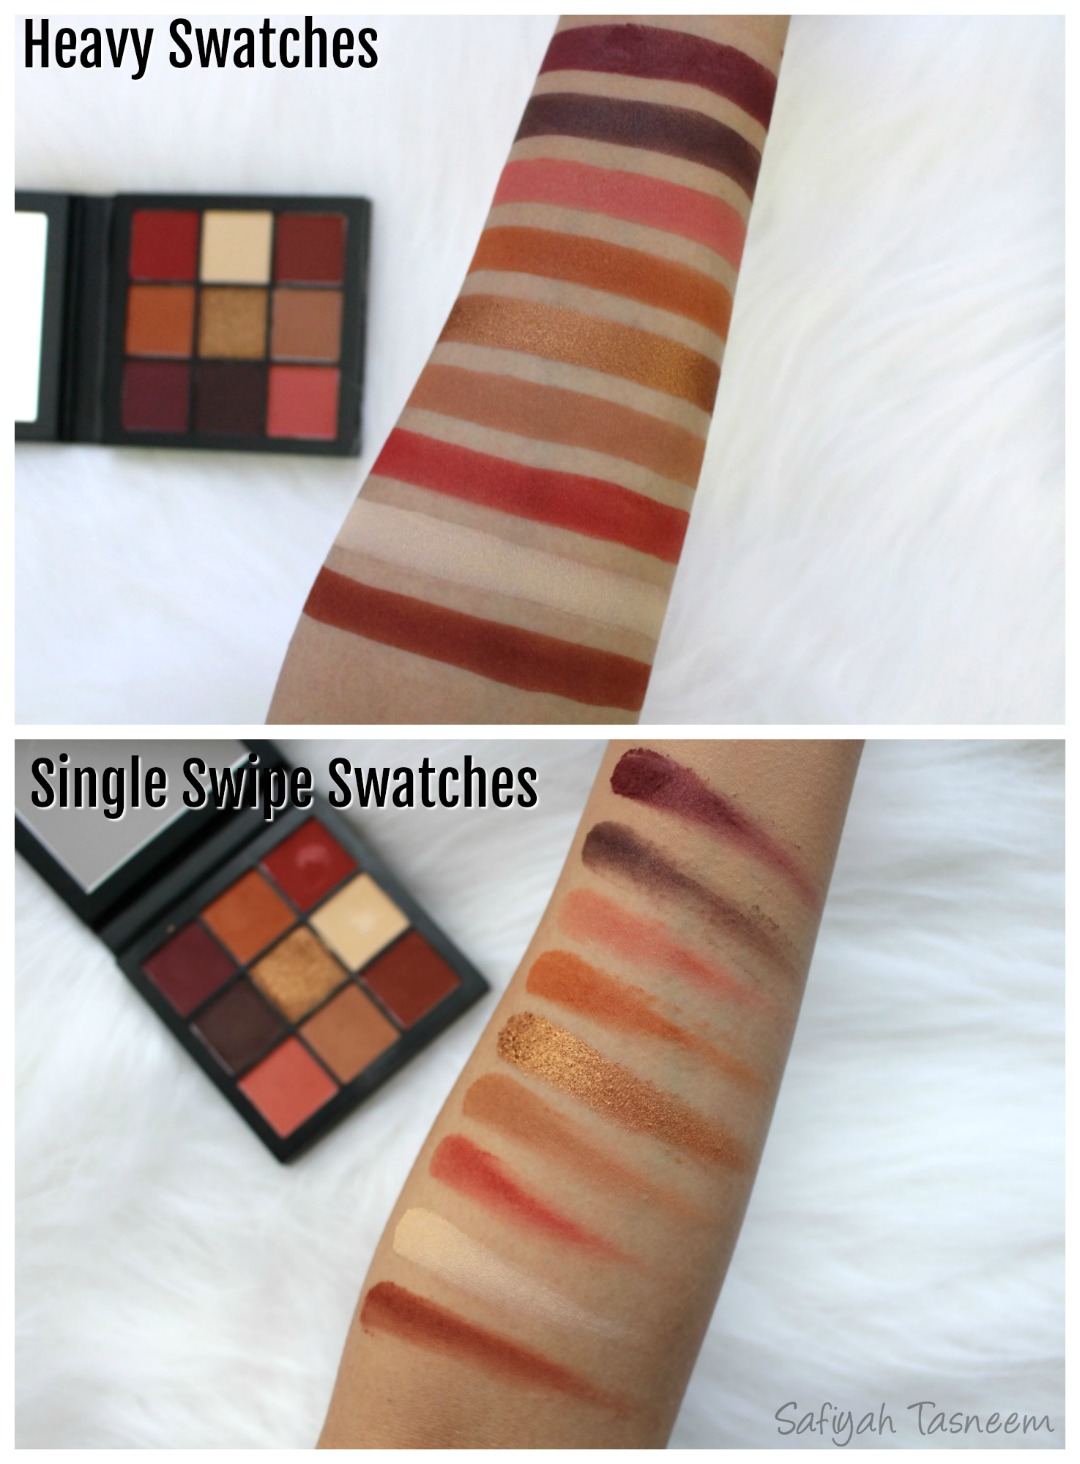 SAFIYAH TASNEEM Sunday Swatches Huda Beauty Obsessions Palette Review